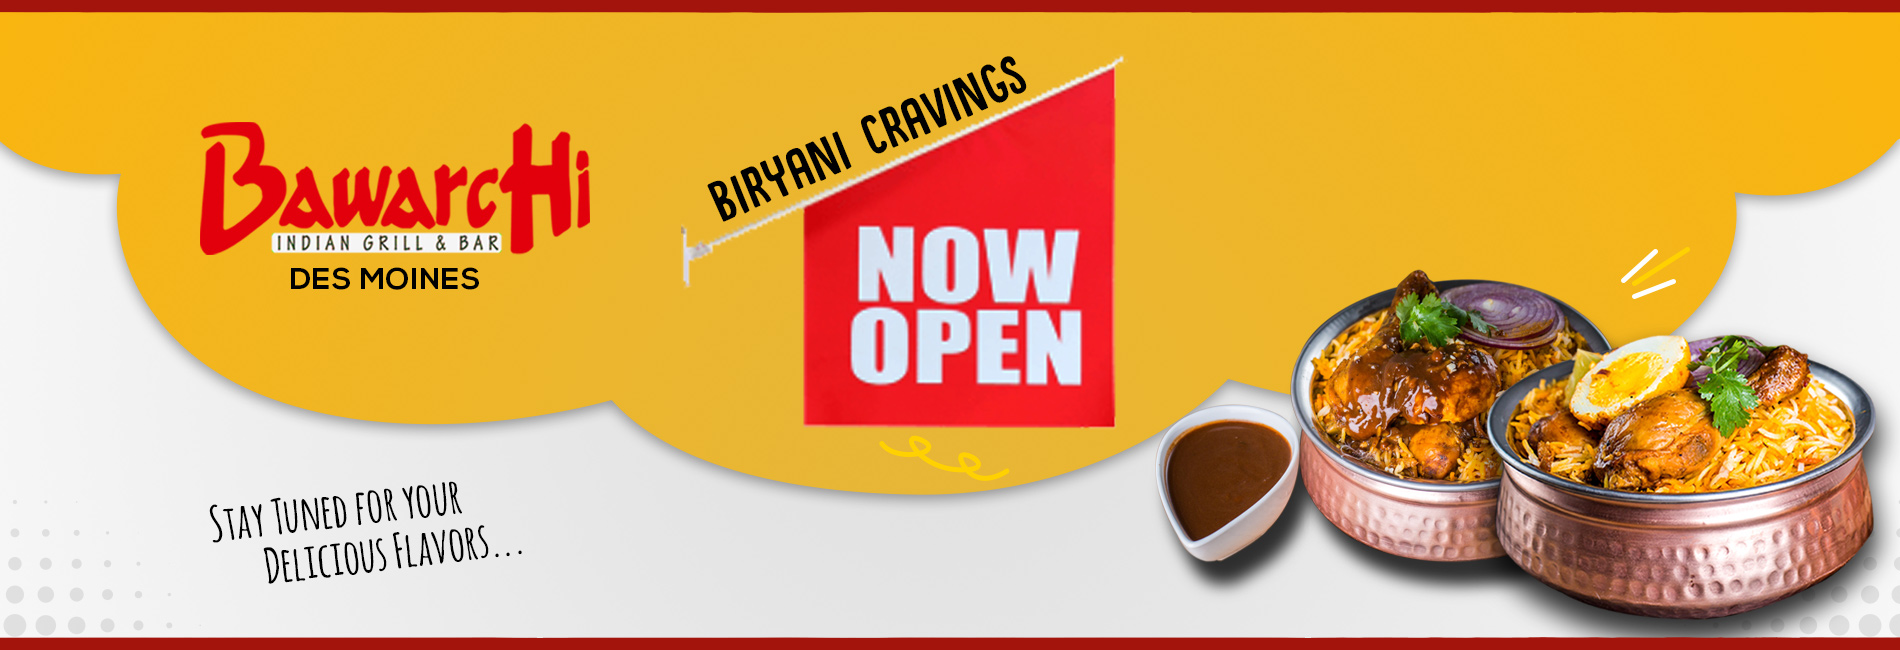 Bawarchi Maryland - Now Open